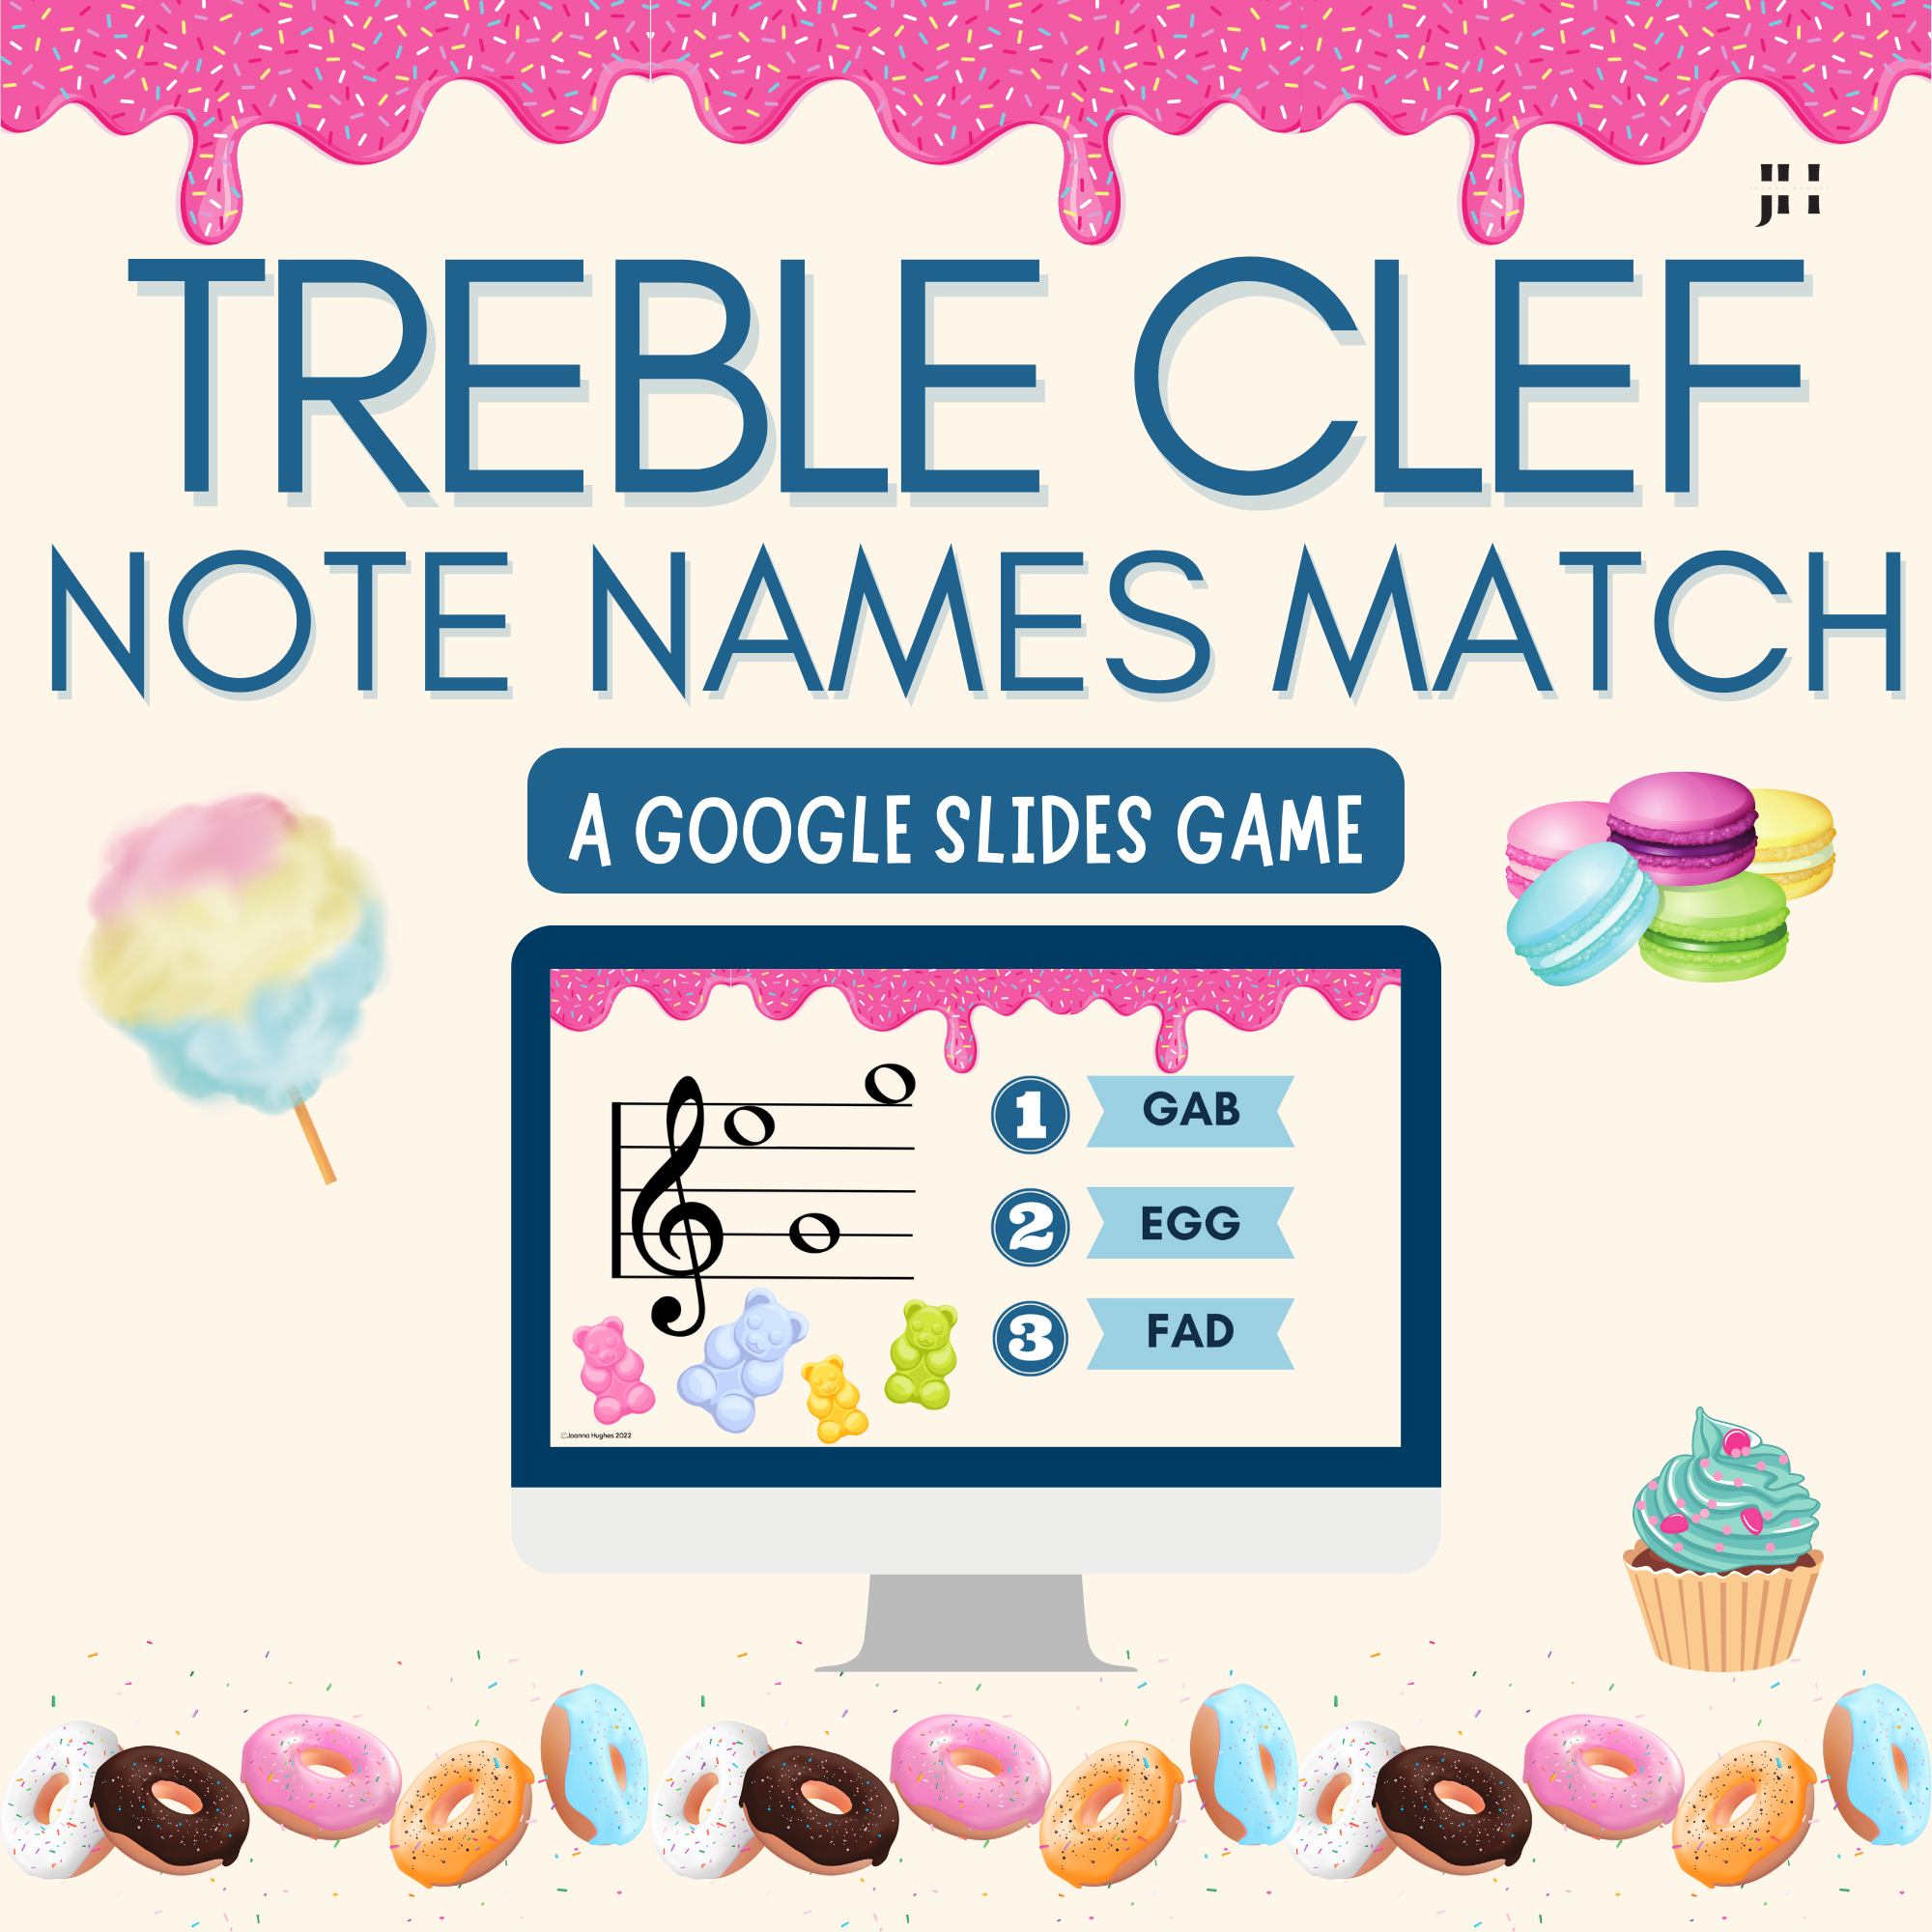 Treble Clef Note Name Match: A Digital Game to Learn the Note Names on the Staff